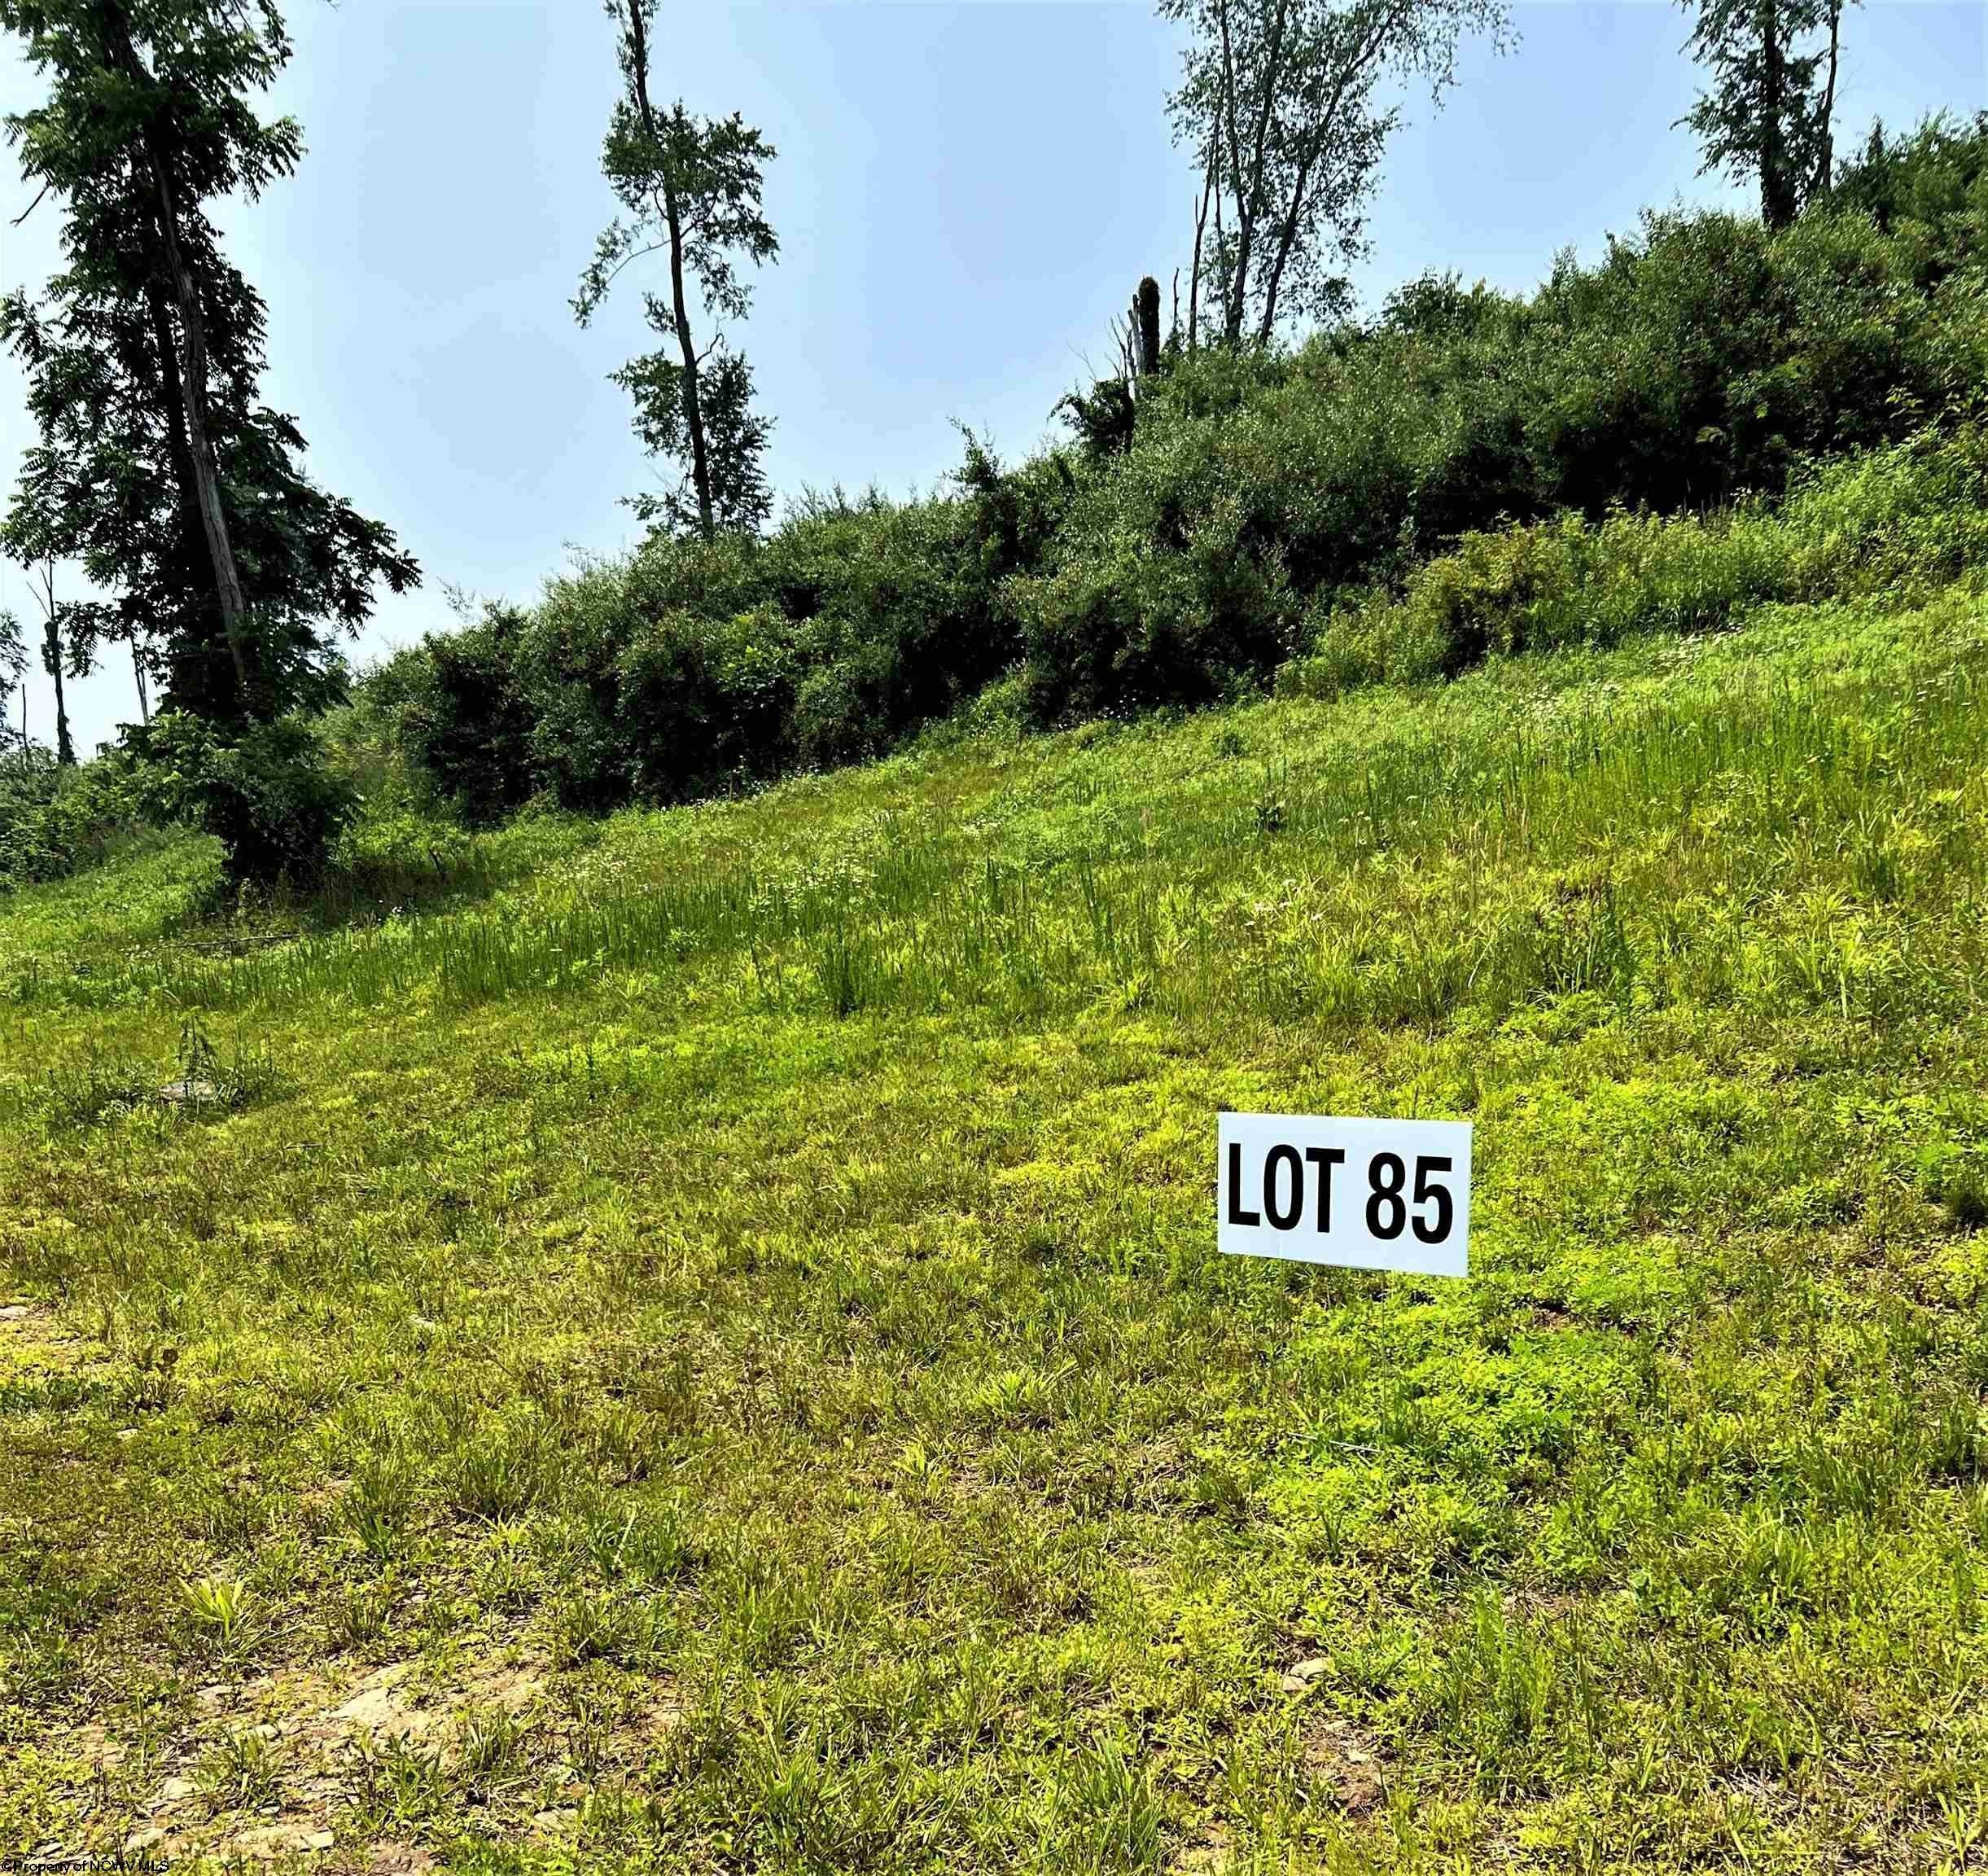 5. Lot 85 Turquoise Way